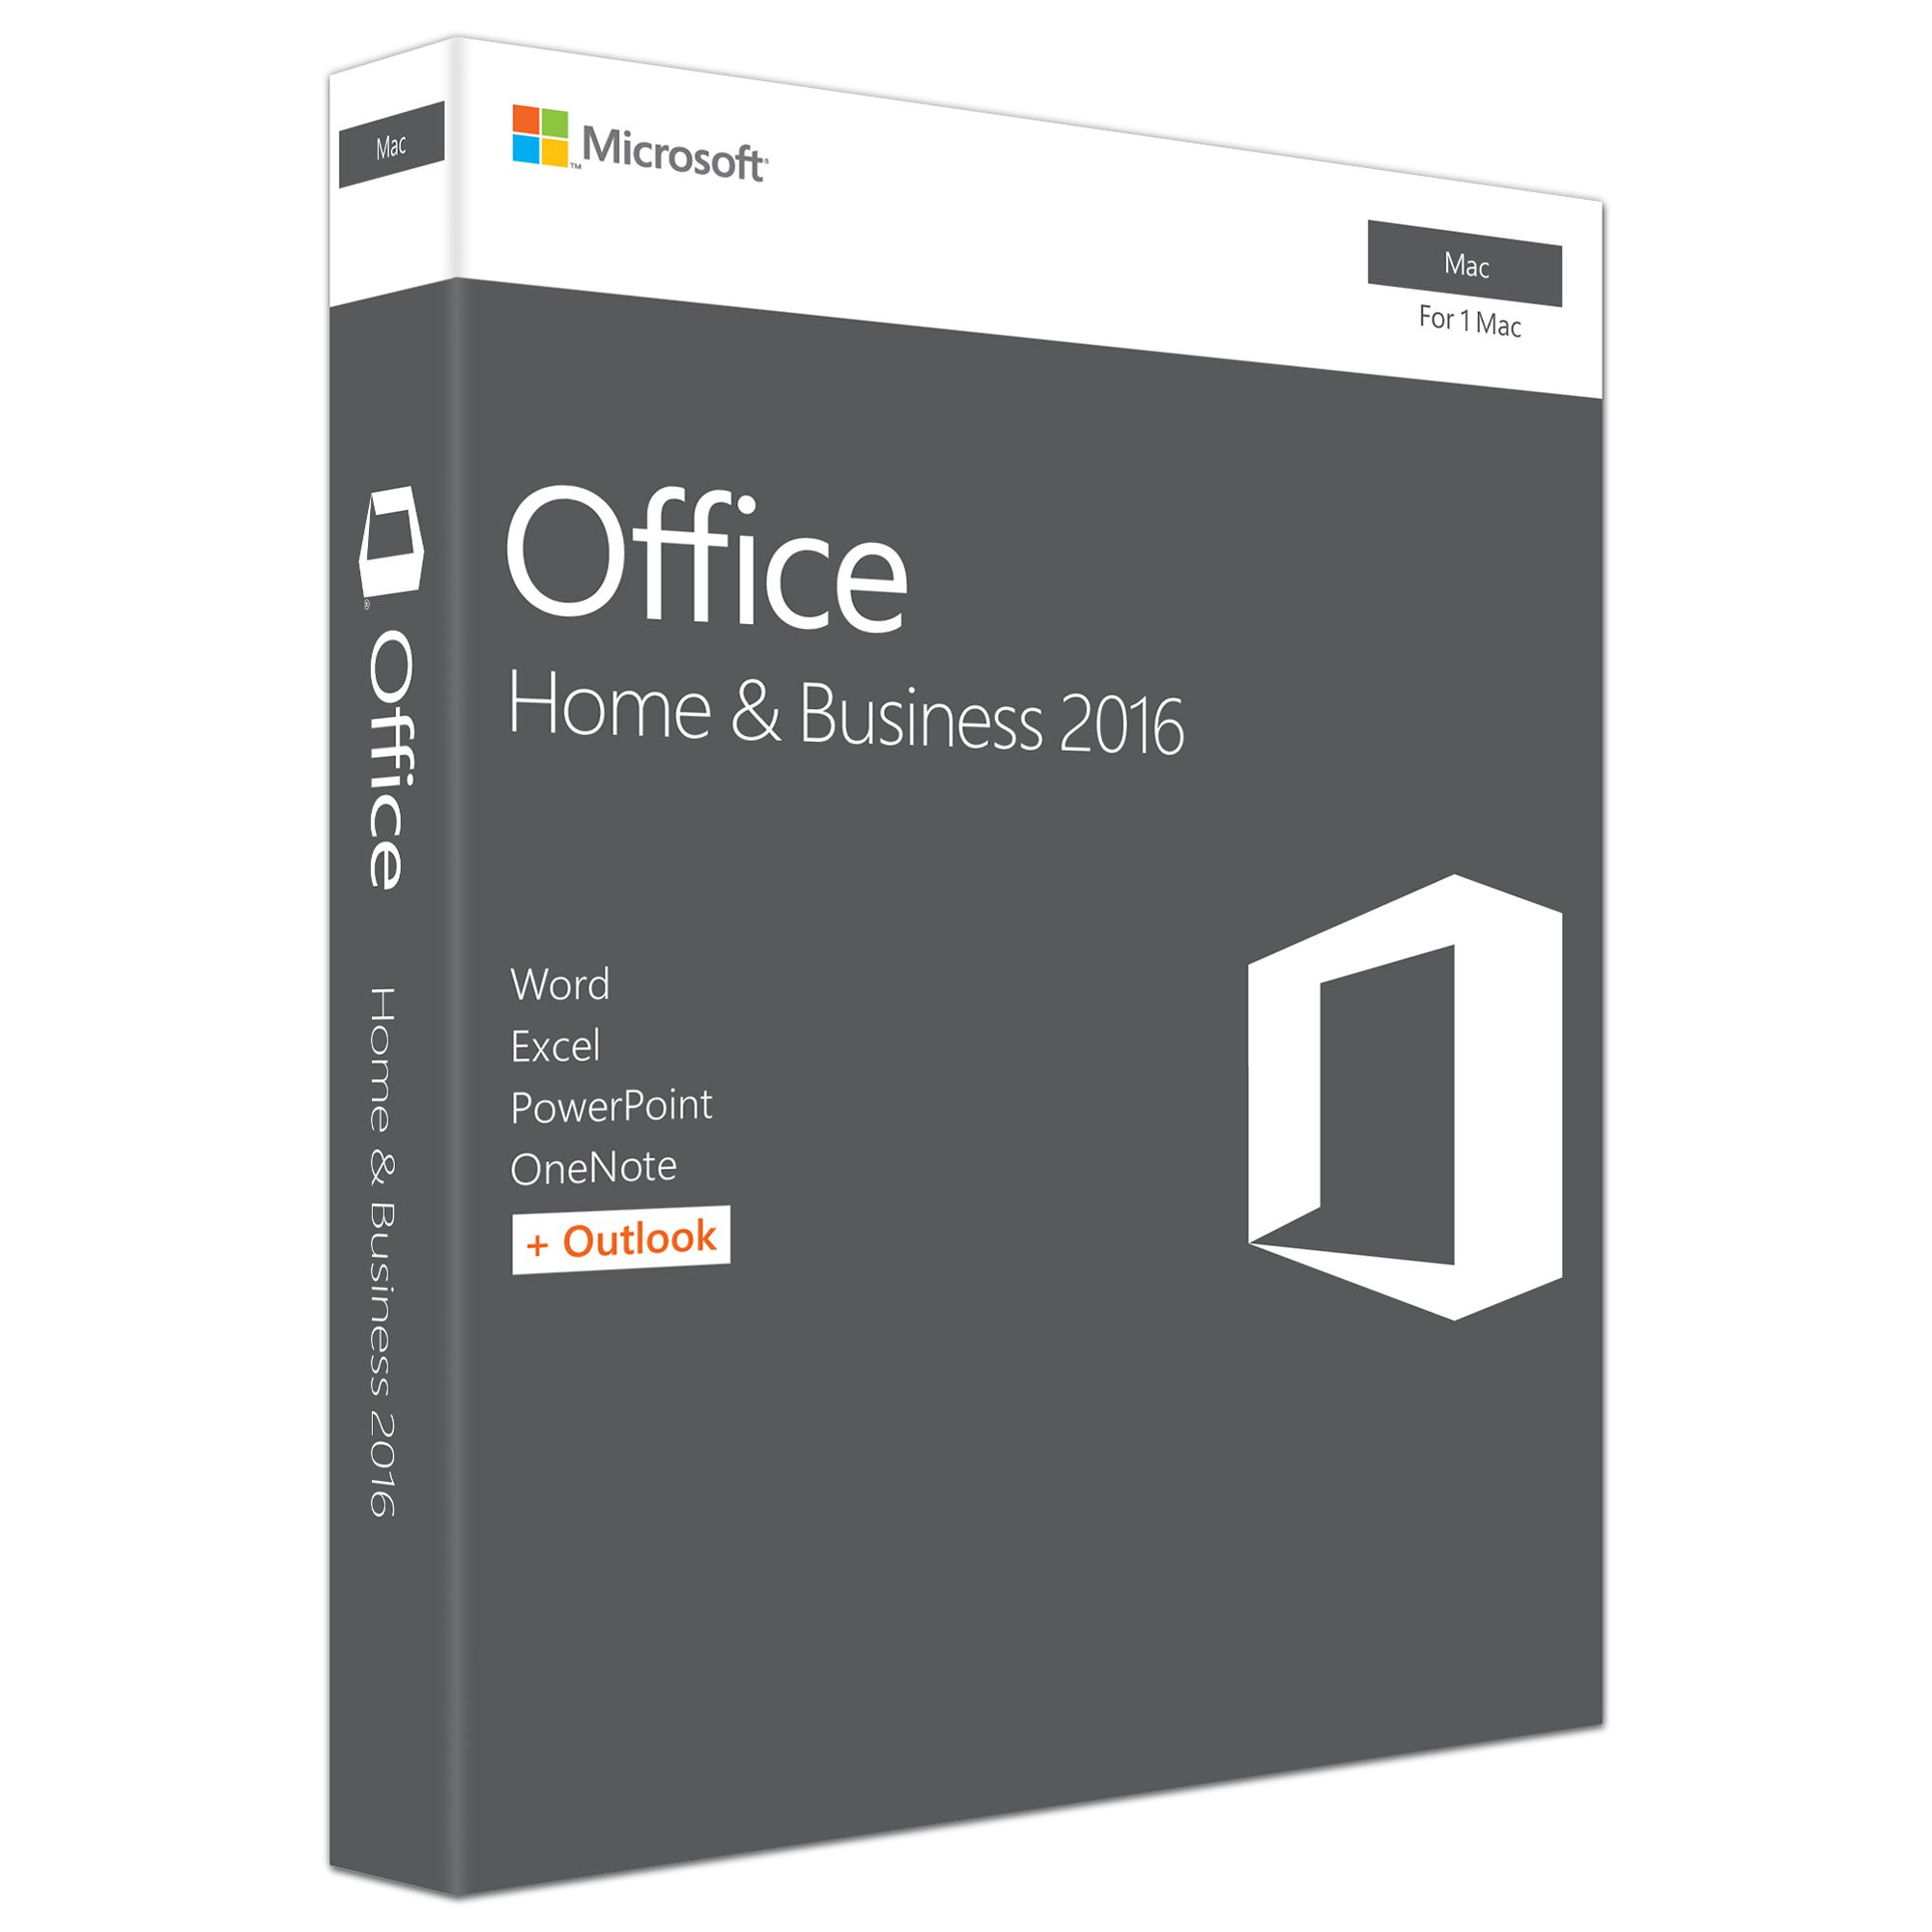 Microsoft Office Home & Business 2016 Medialess P2 pentru Apple MAC title=Microsoft Office Home & Business 2016 Medialess P2 pentru Apple MAC